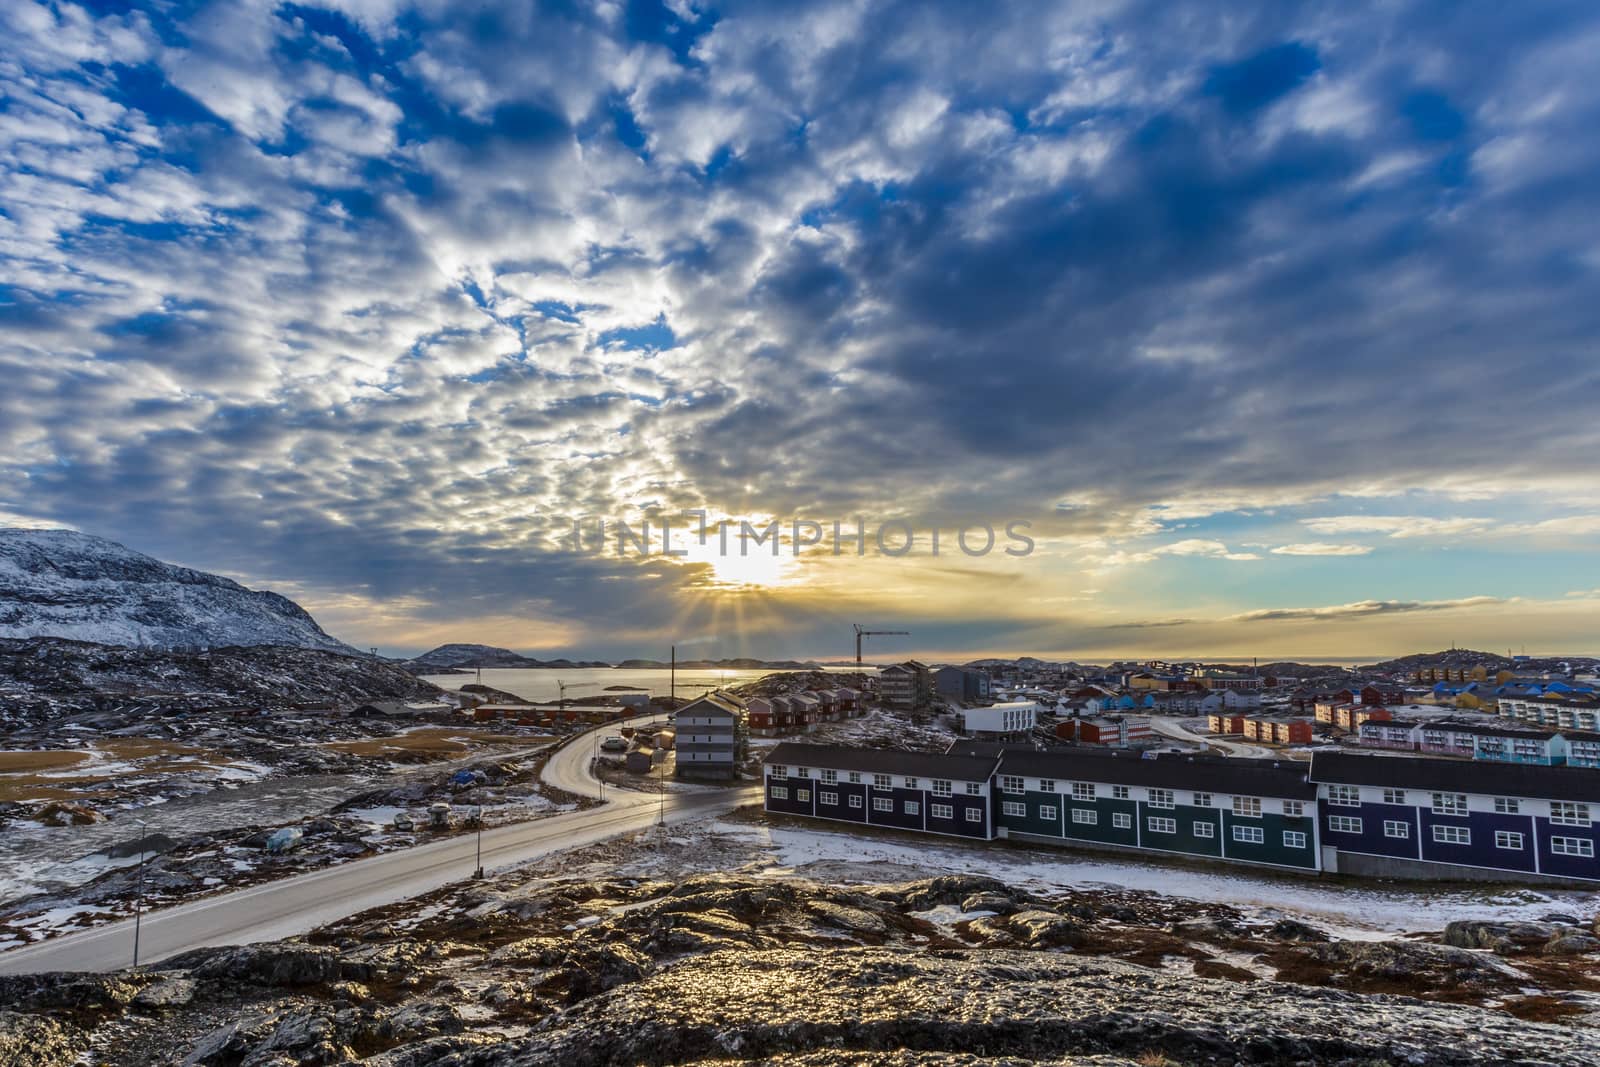 Arctic streets with houses on the rocky hills in sunset city pan by ambeon